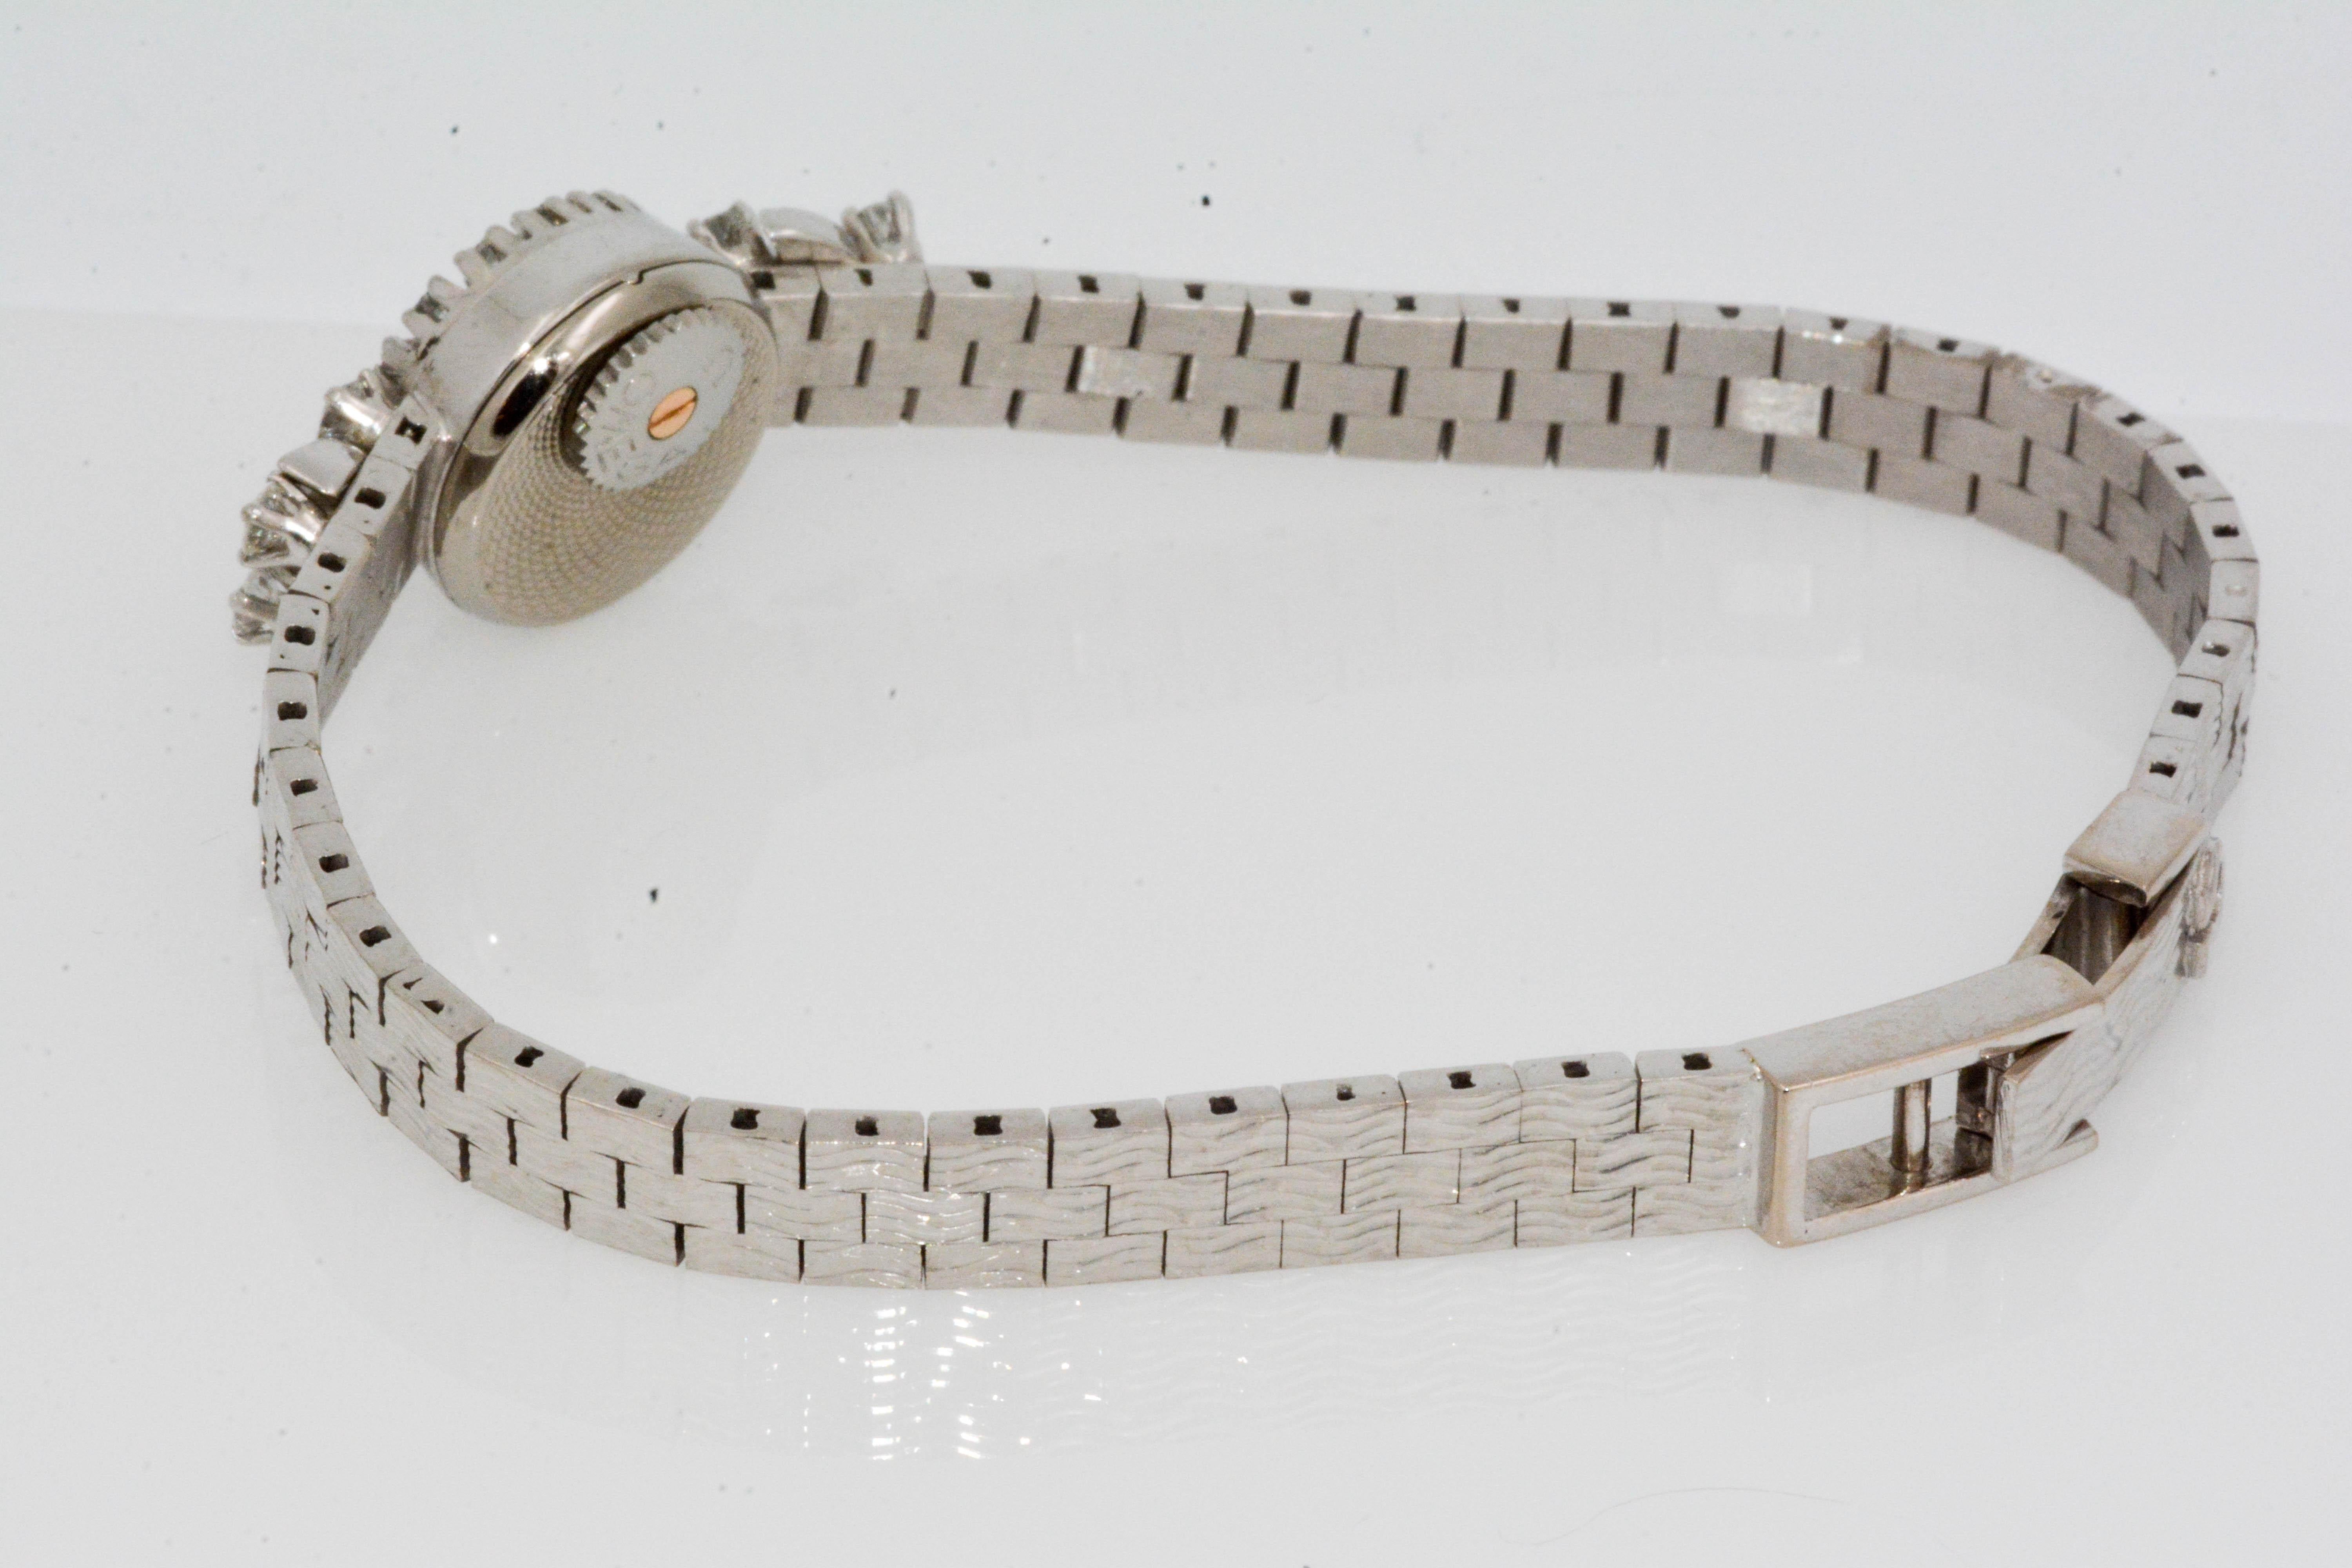 Circa 1960's 18 Karat white gold ladies Omega wristwatch. This stunning little beauty has 0.40 carat total weight round brilliant cut diamonds surrounding the bezel and at the top of the bracelet. Slim and shiny 18 karat gold bracelet. 